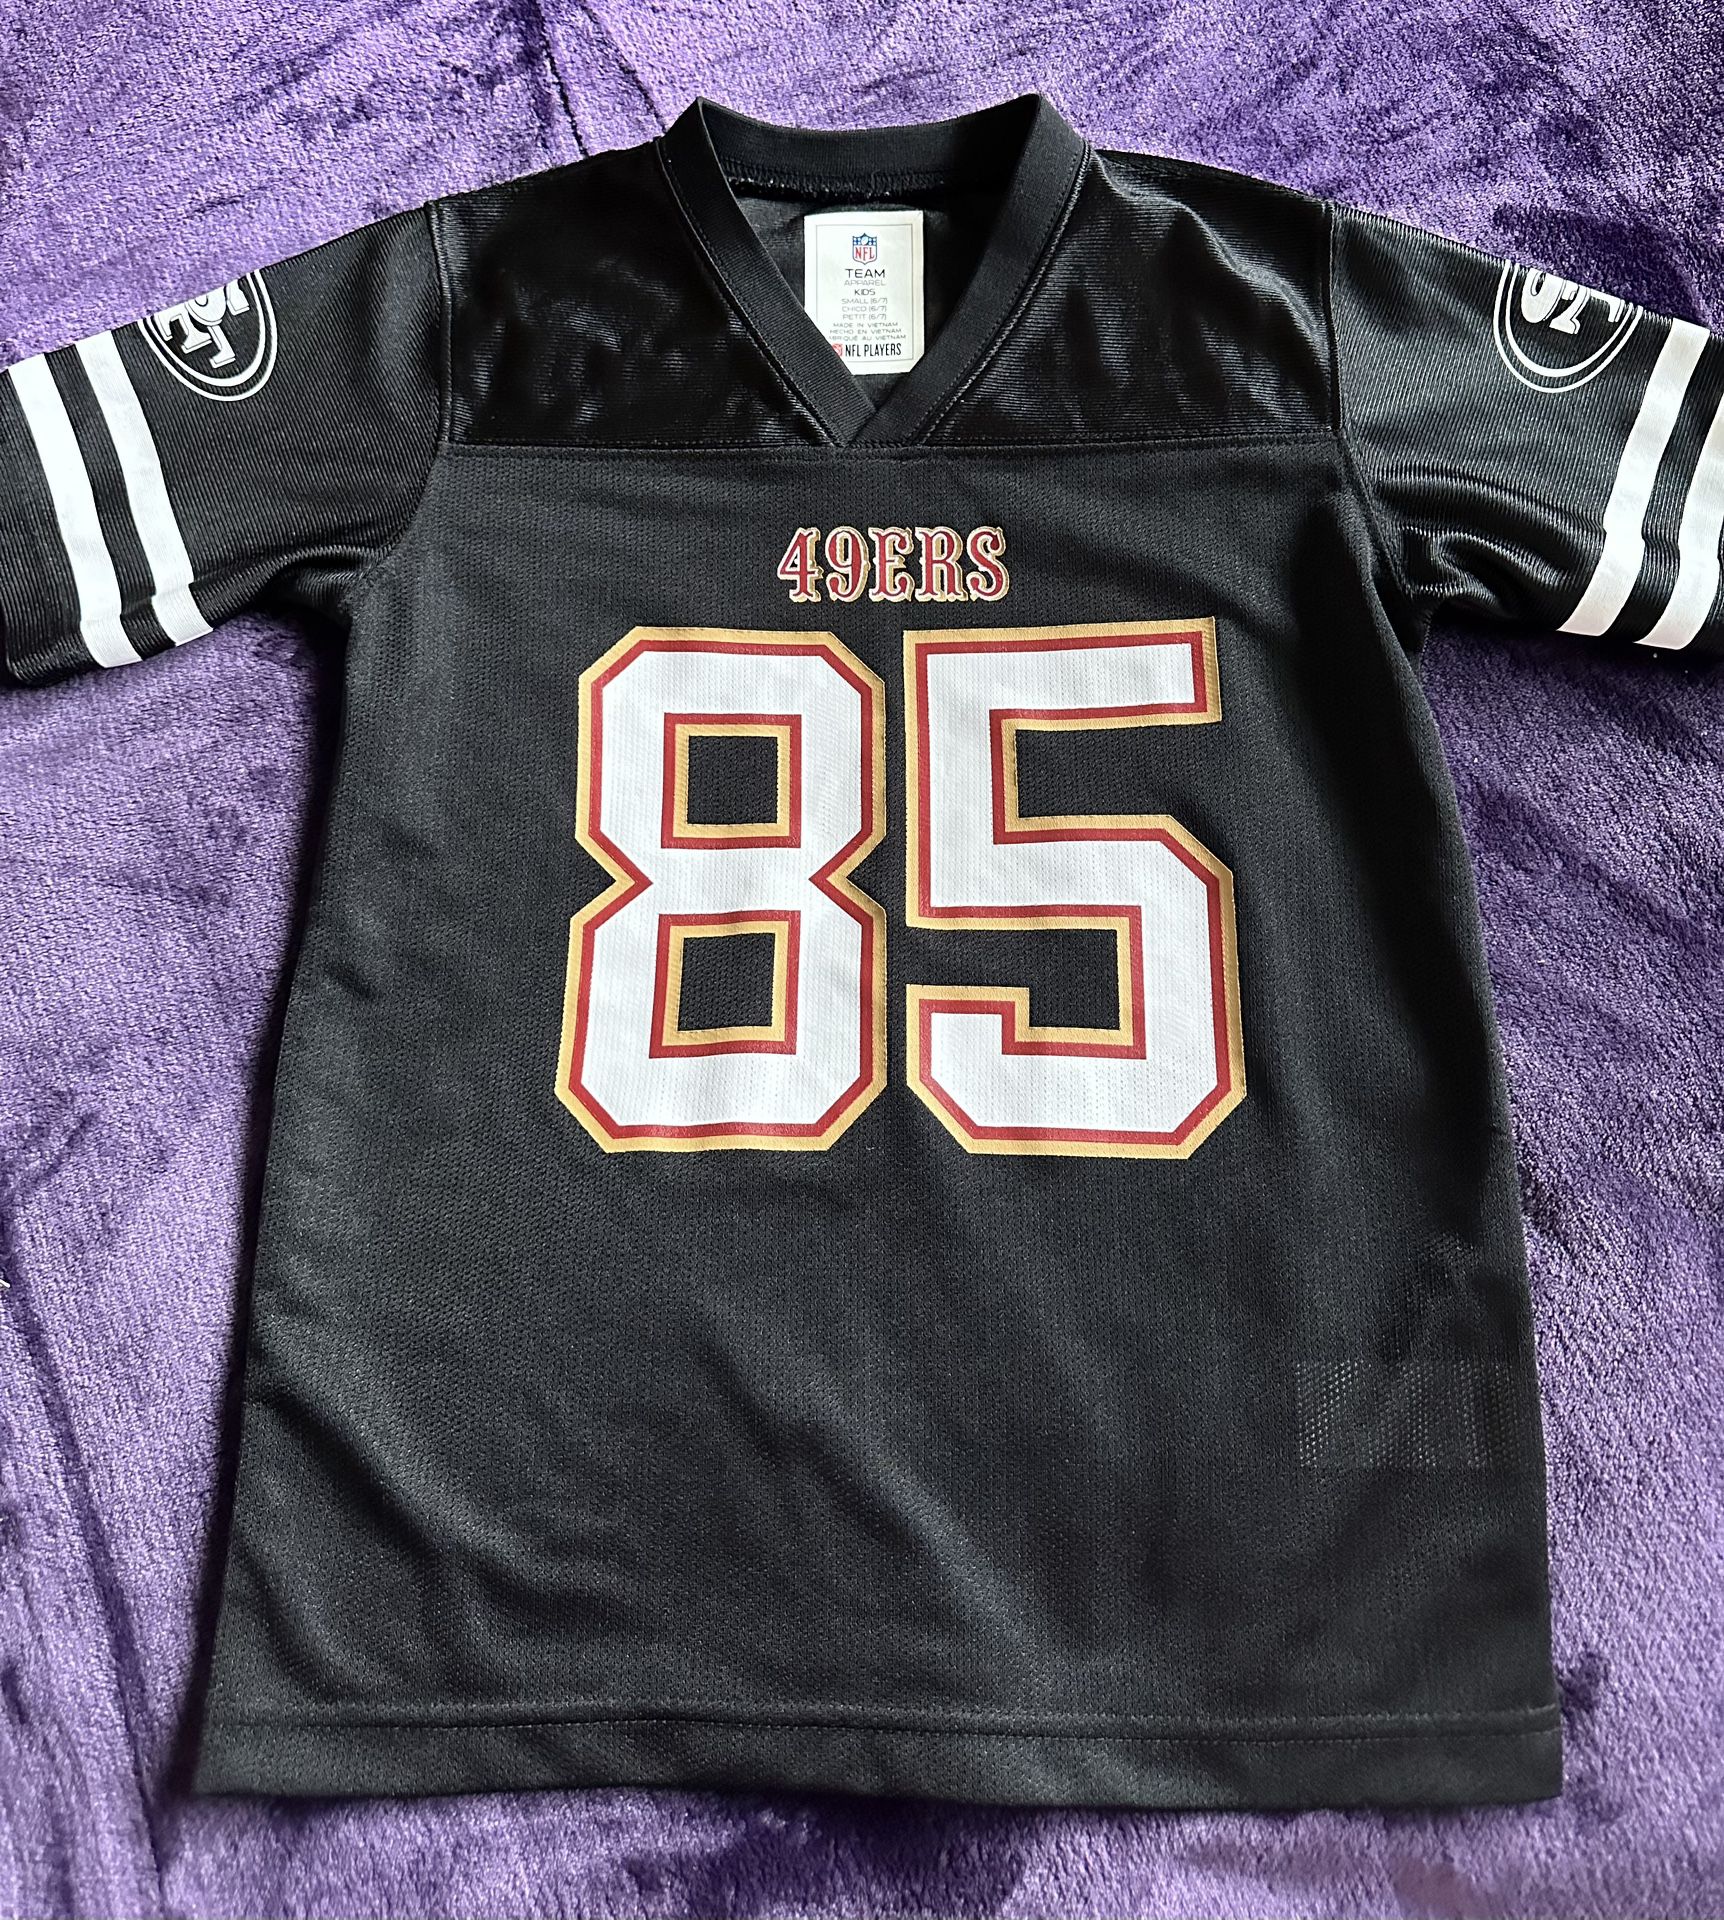 Kittle 49ers Youth Jersey Size S(6-7) for Sale in San Jose, CA - OfferUp